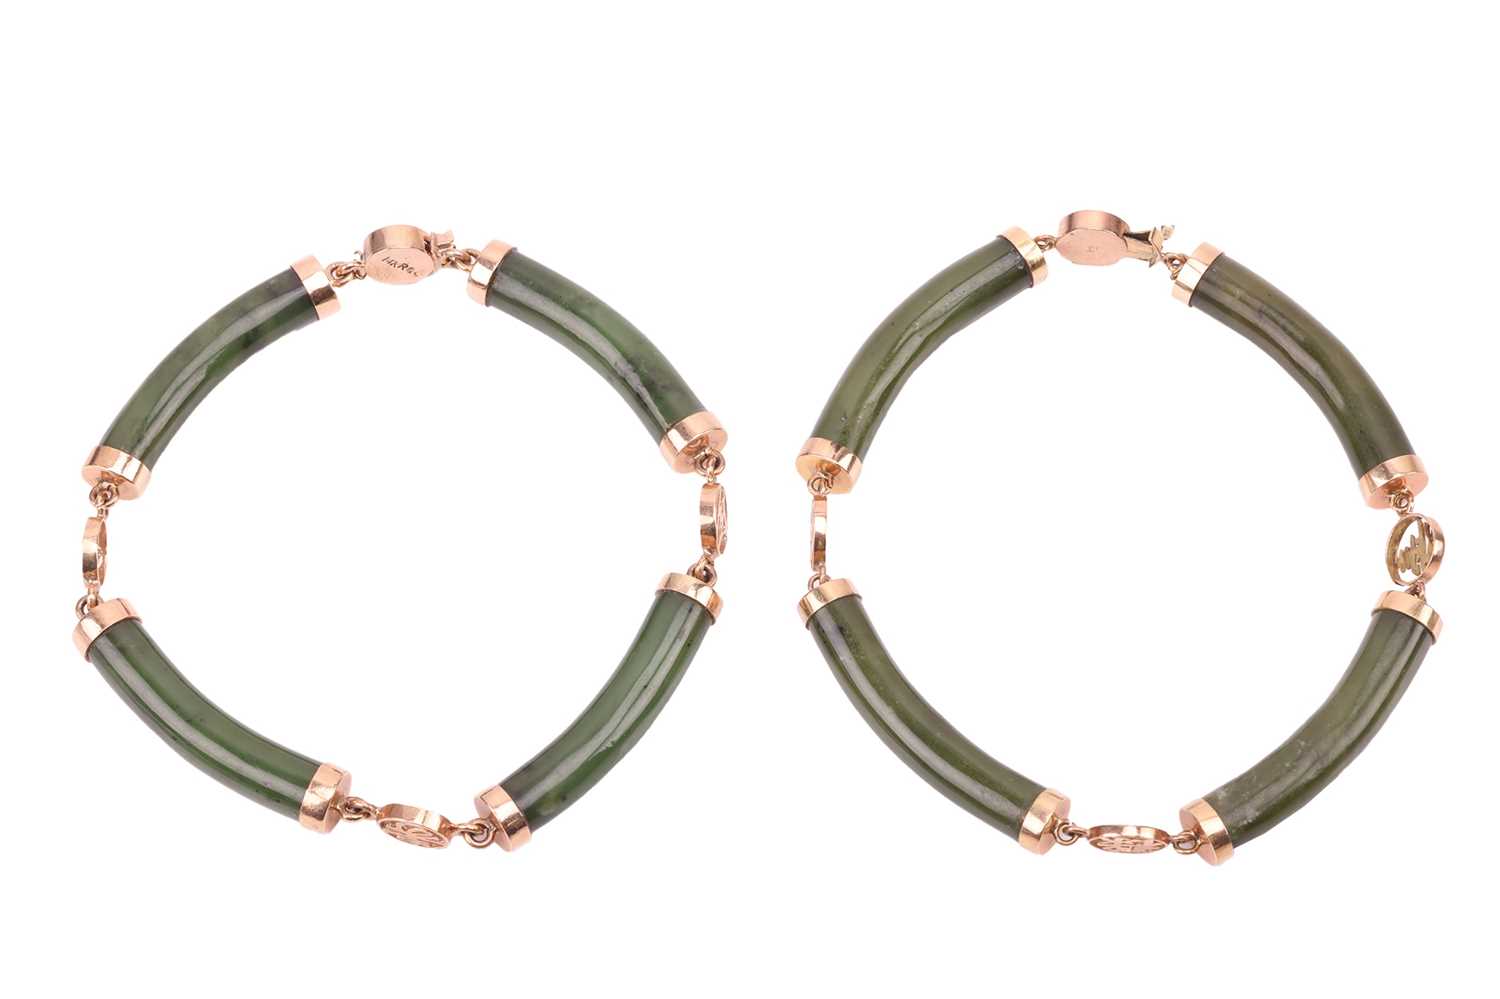 Two Chinese nephrite bracelets, comprising curved nephrite bars, flanked with pierced spacers spelli - Image 2 of 7